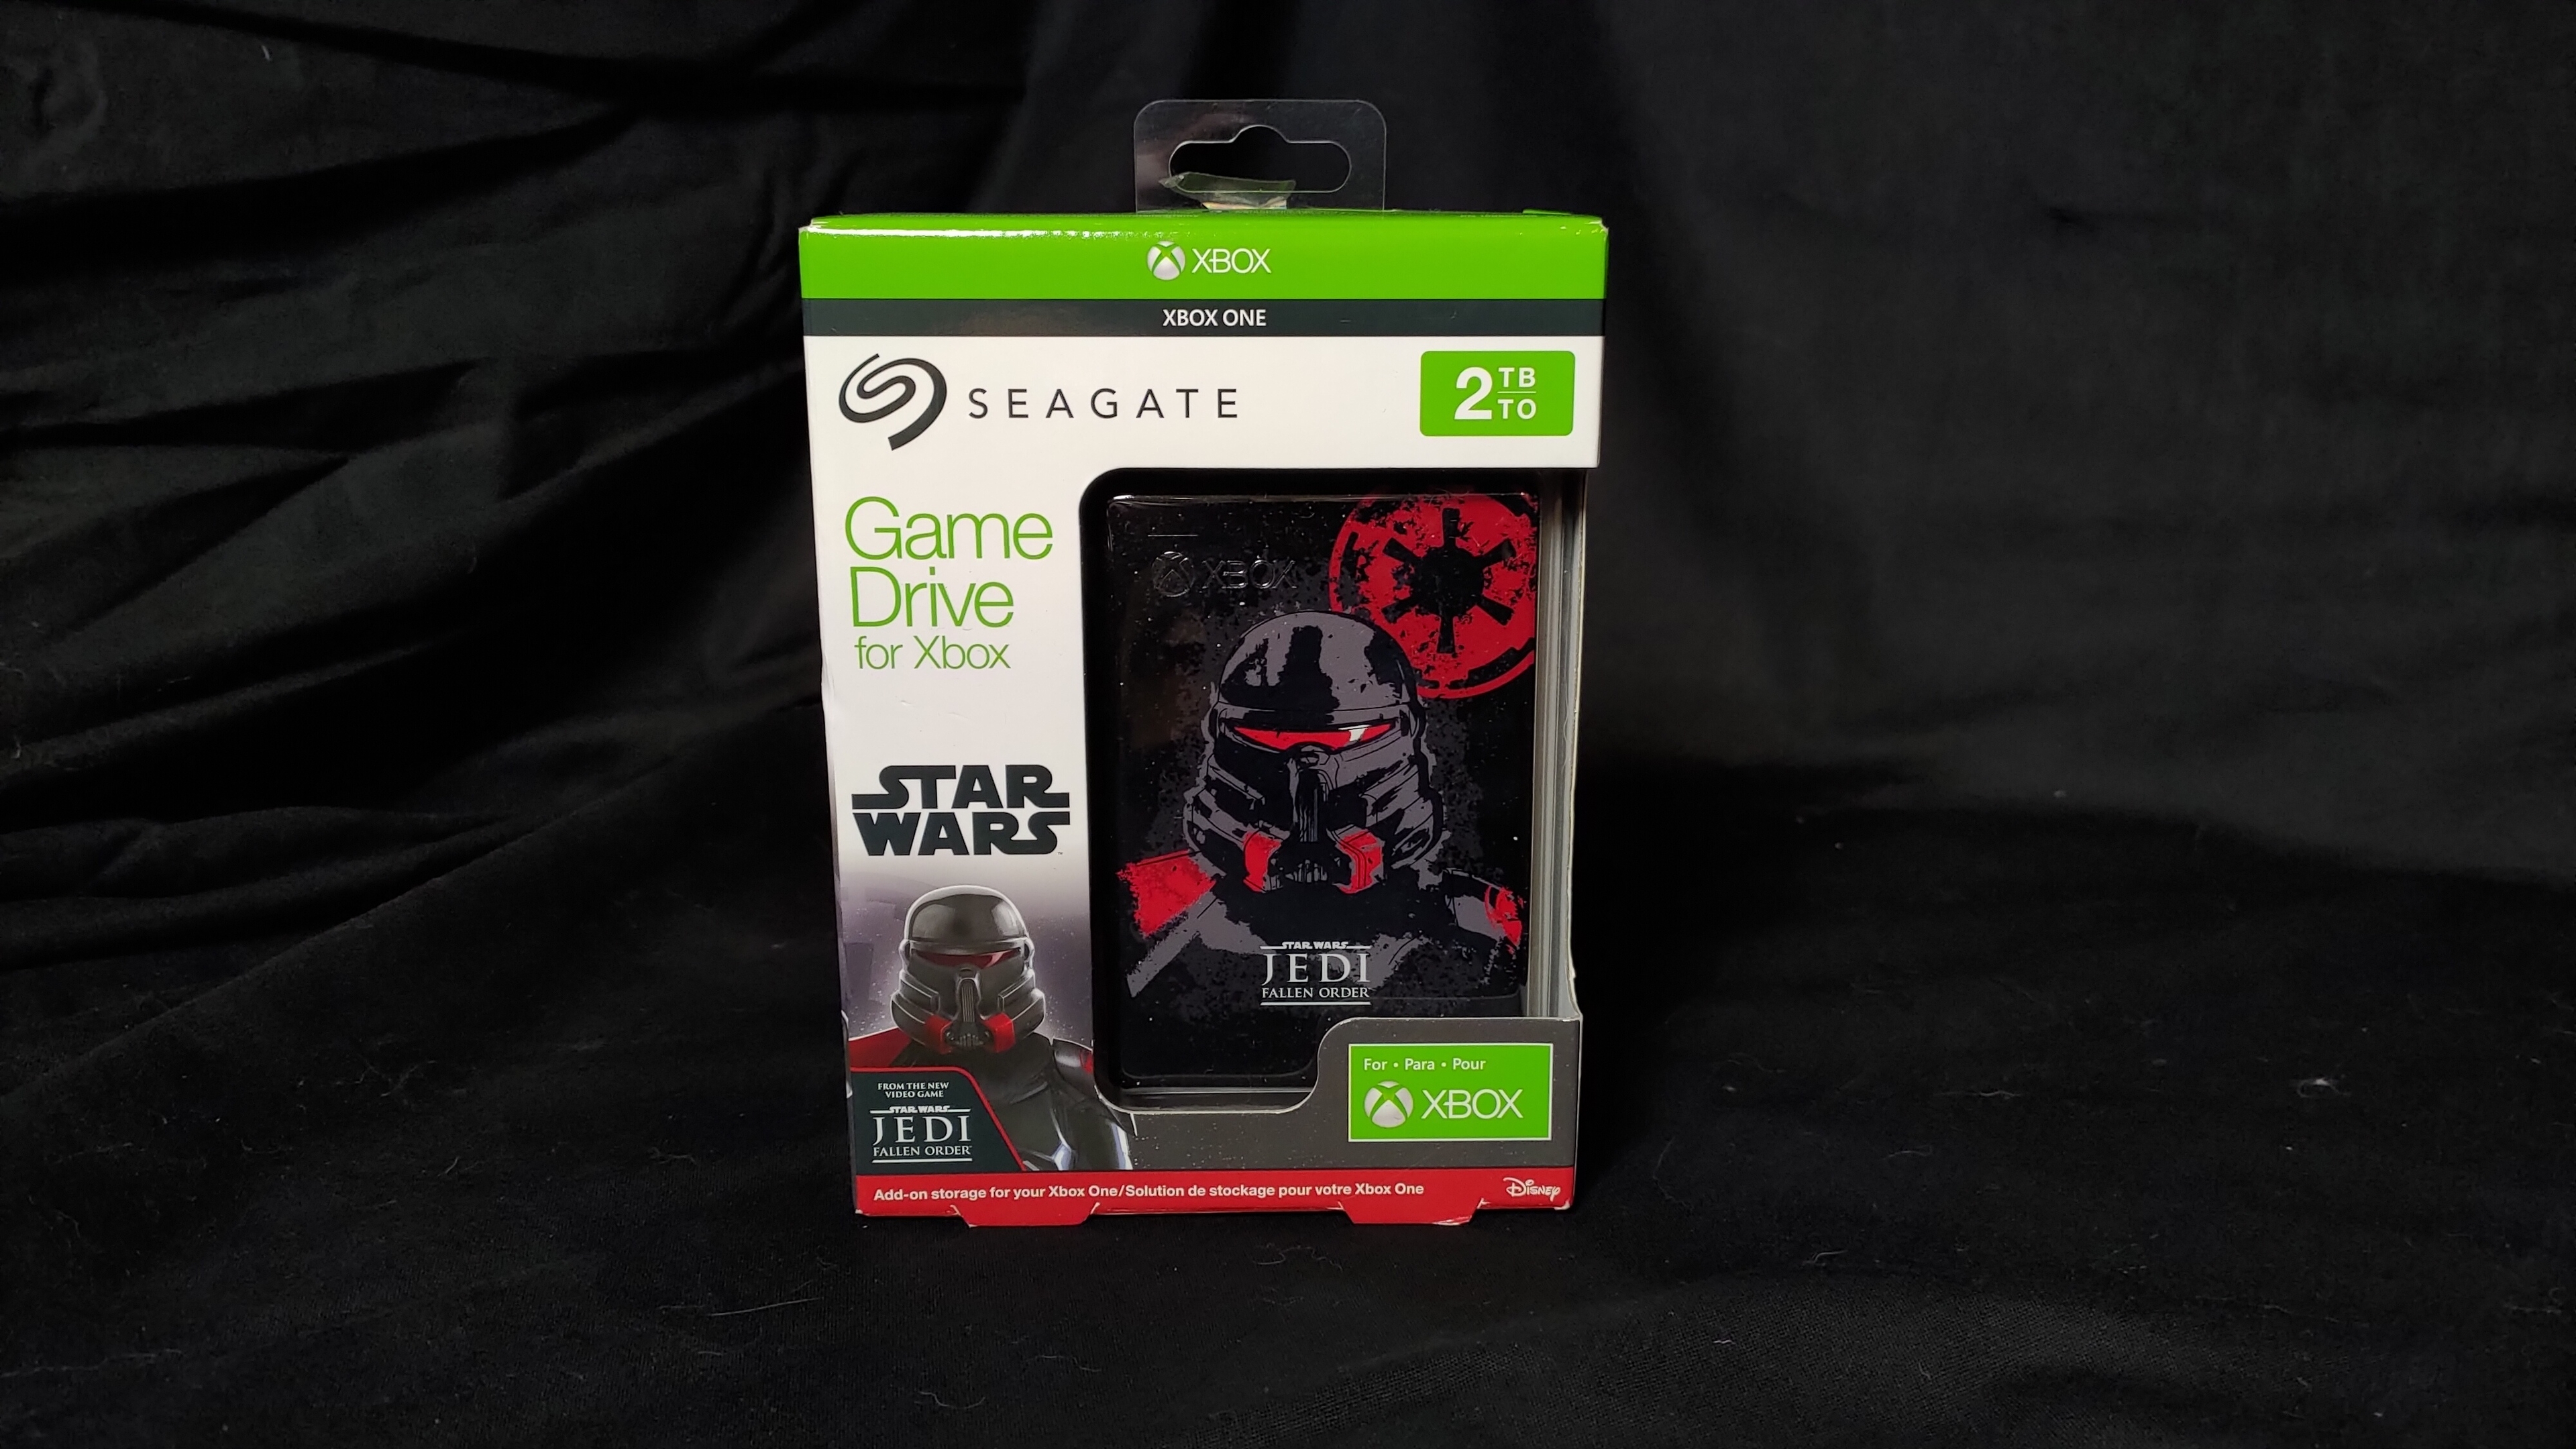 TEST du disque dur 2 To Seagate Game Drive for Xbox Star Wars Jedi